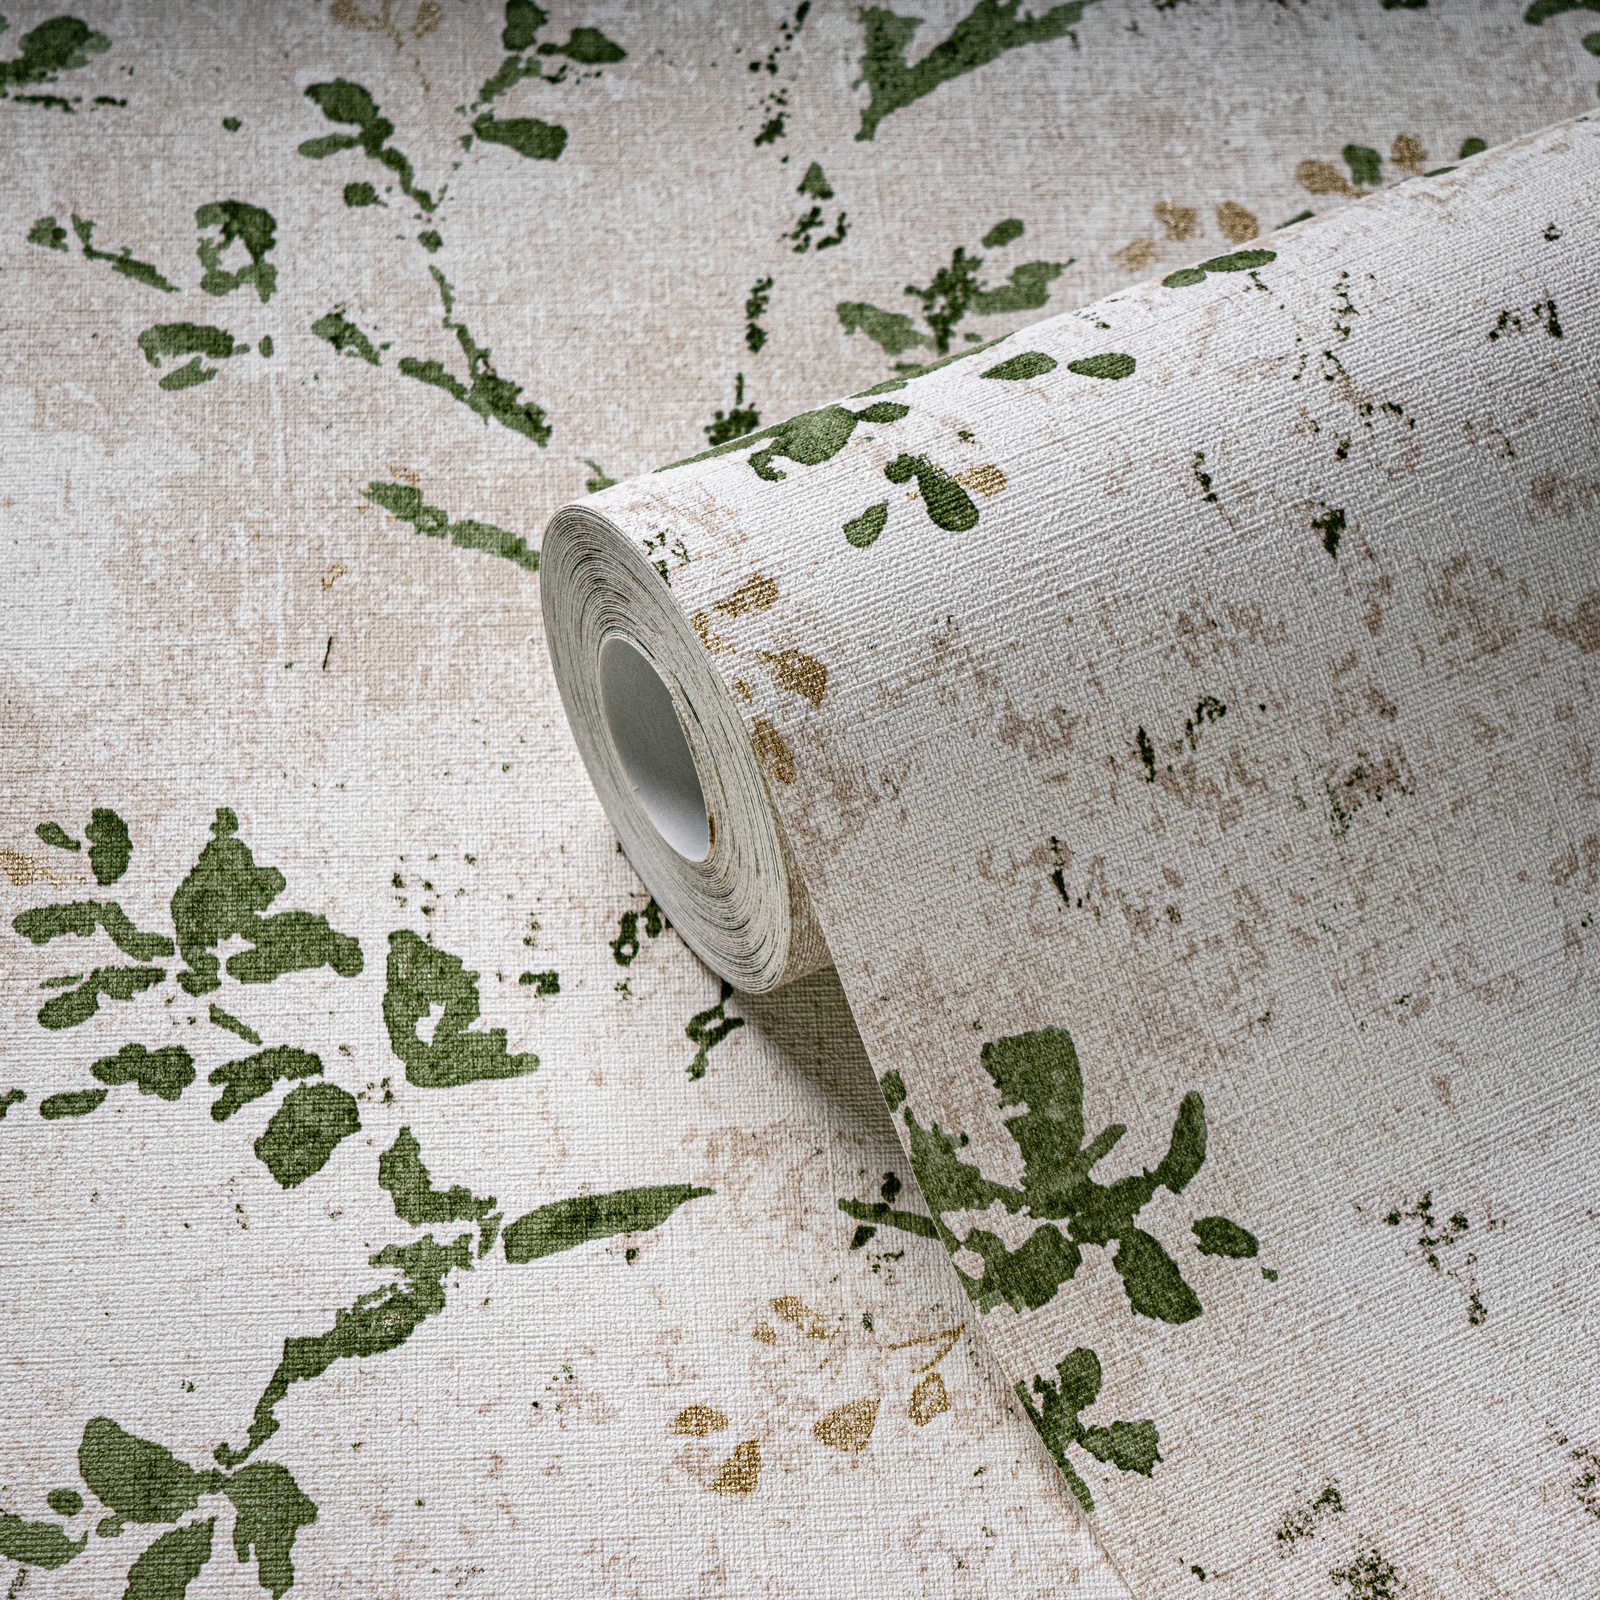             Non-woven wallpaper with a playful floral pattern - beige, green, gold
        